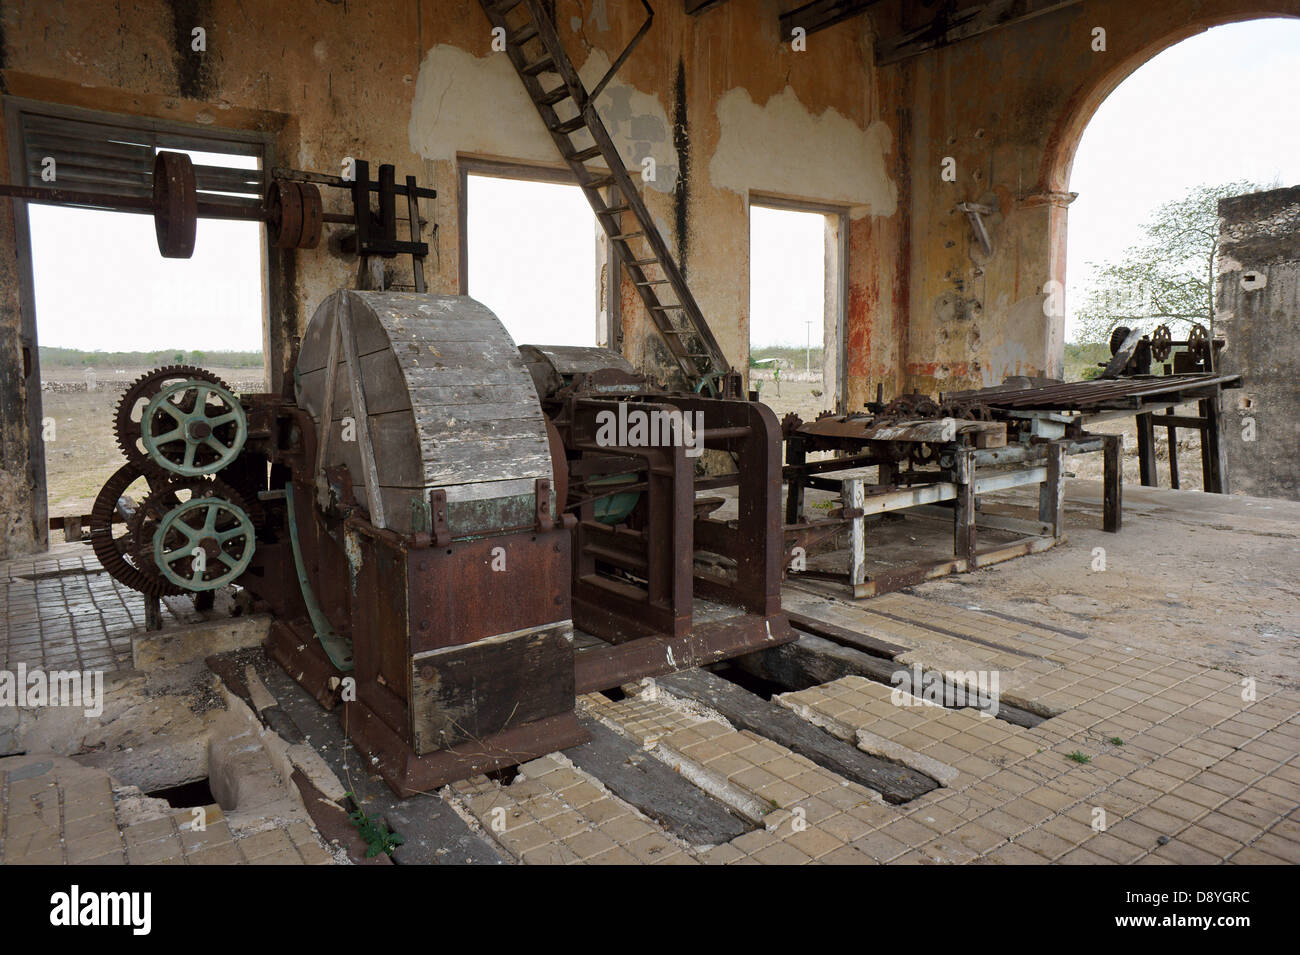 Henequen or sisal processing machinery in the machine room at Hacienda Yaxcopoil, Yucatan, Mexico Stock Photo